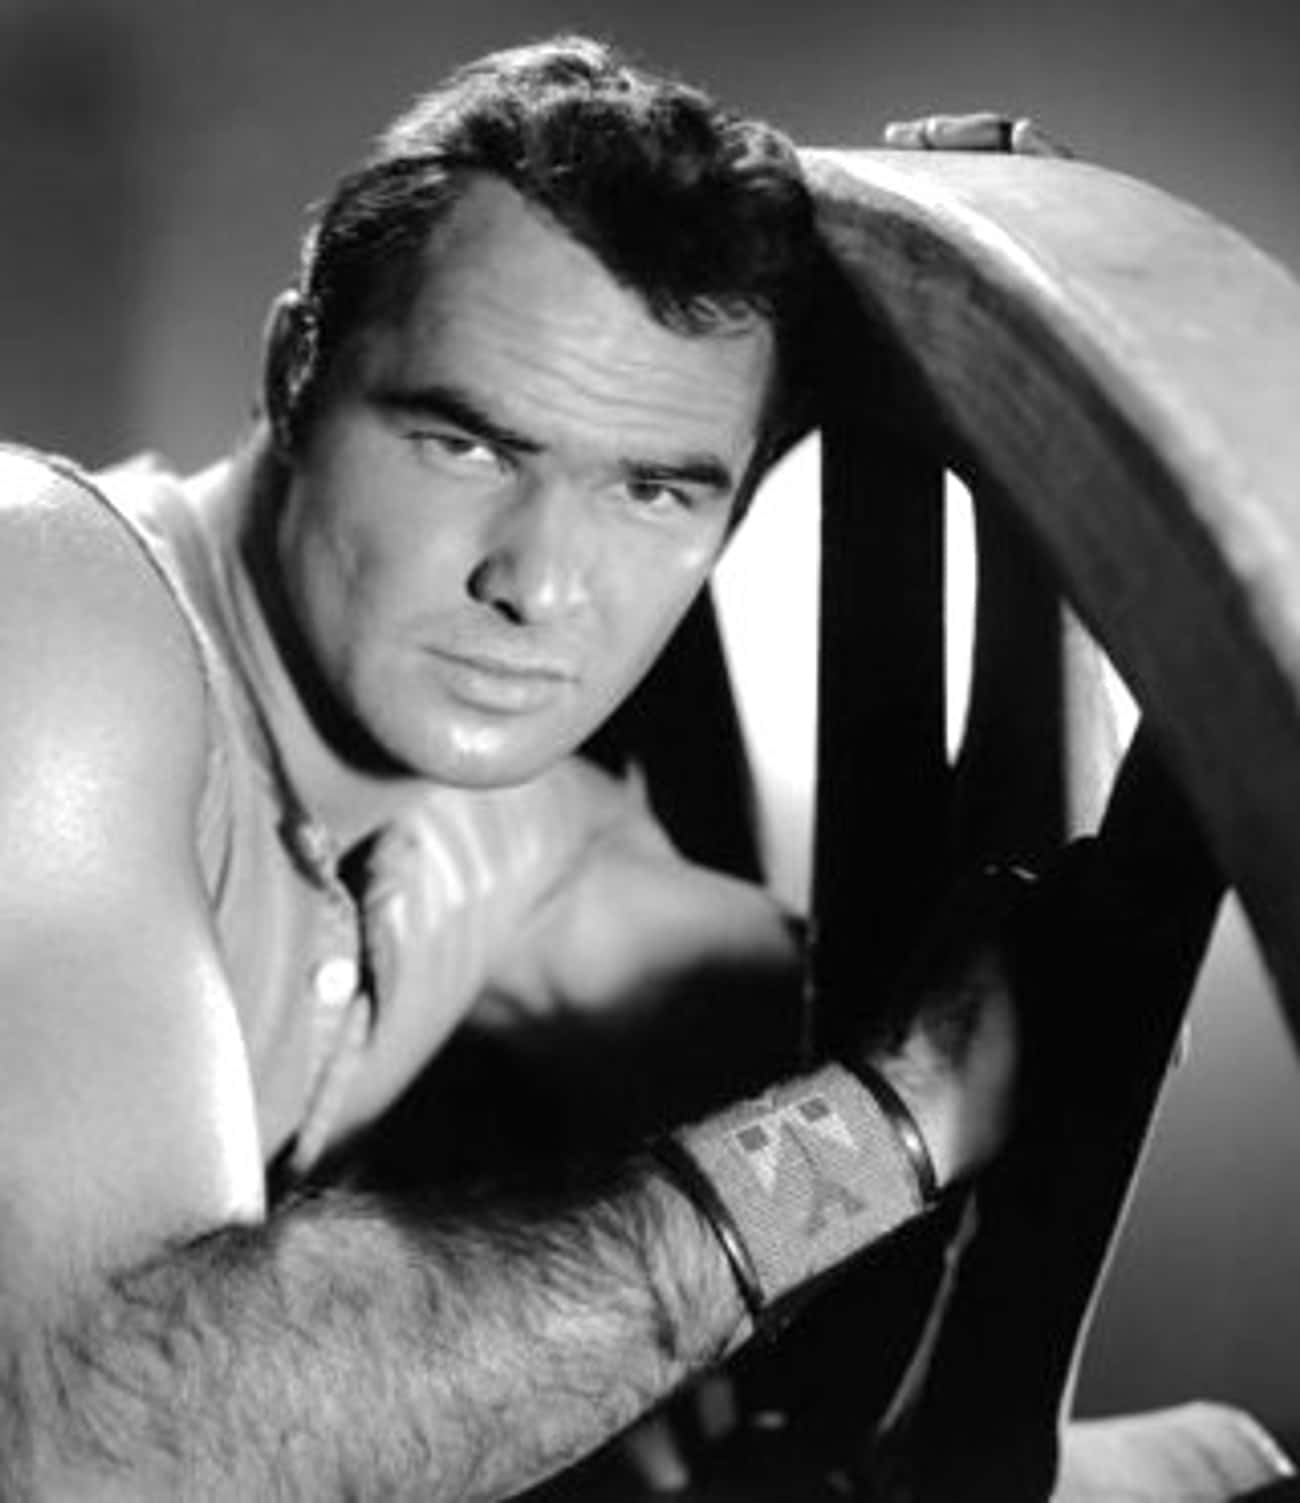 Young Burt Reynolds in a Sleeveless Polo